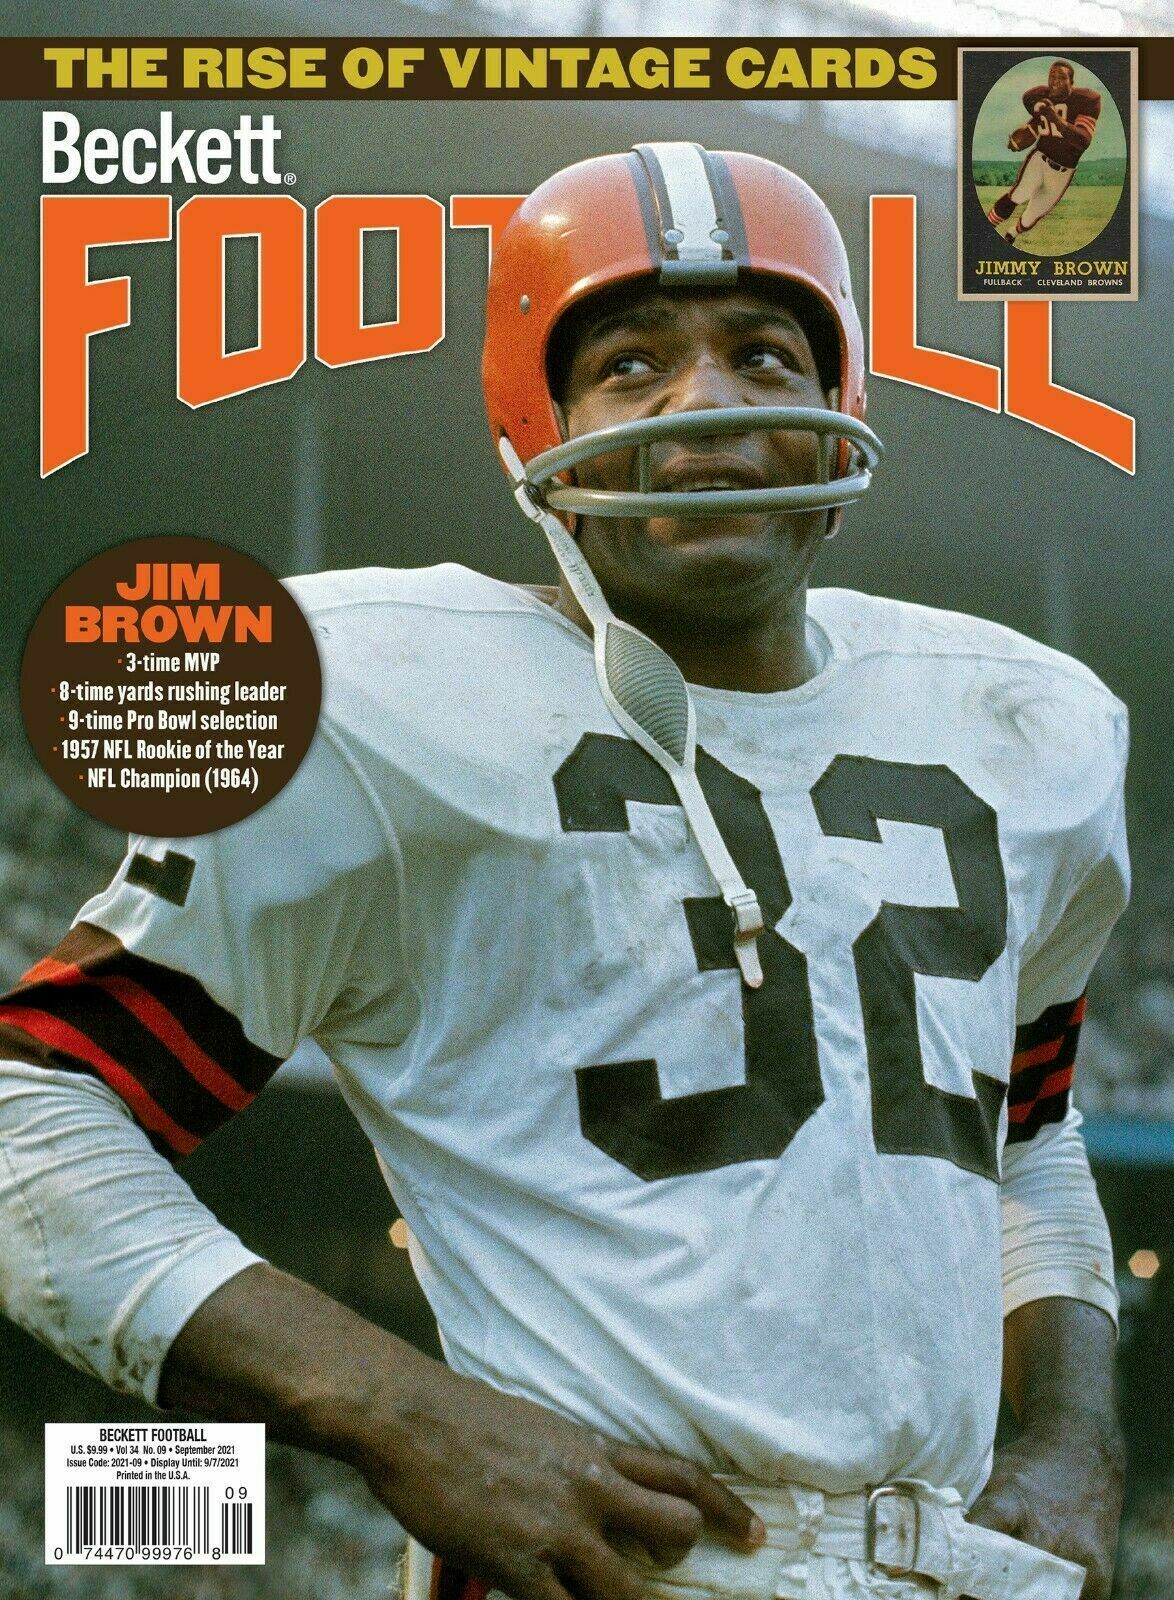 New September 2021 Beckett Football Card Price Guide Magazine With Jim Brown